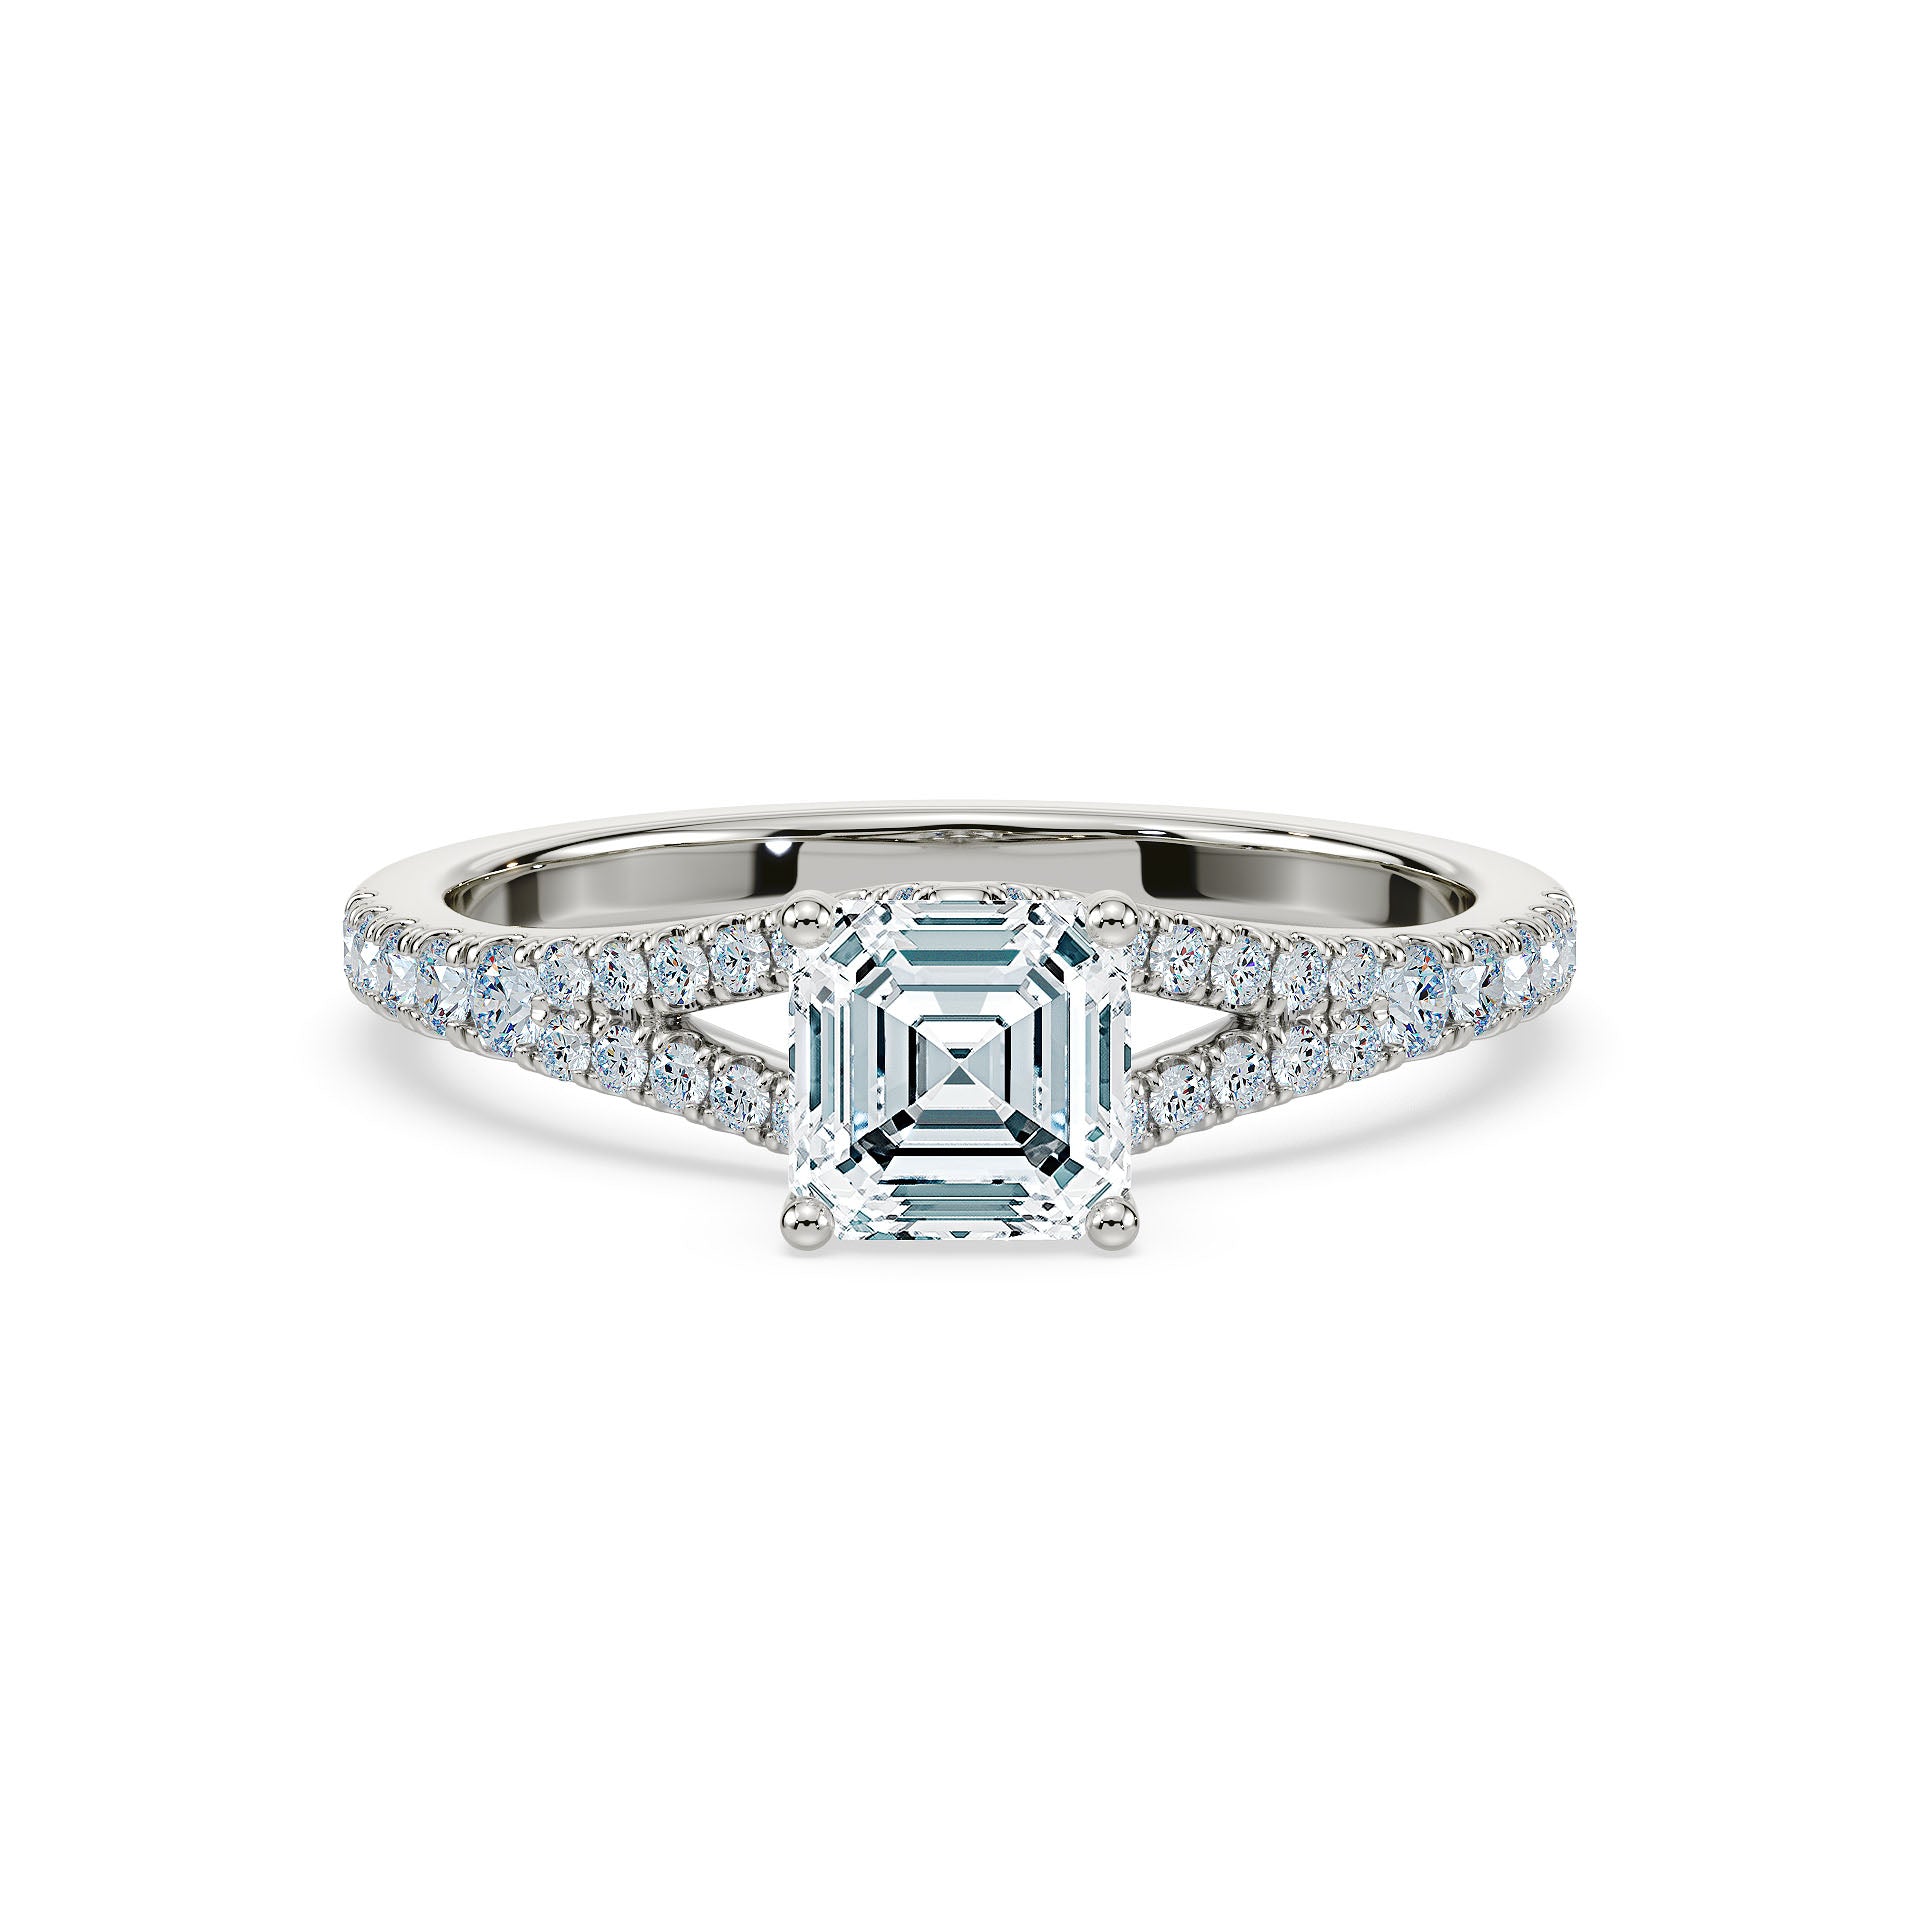 Products Archive - Royal Asscher